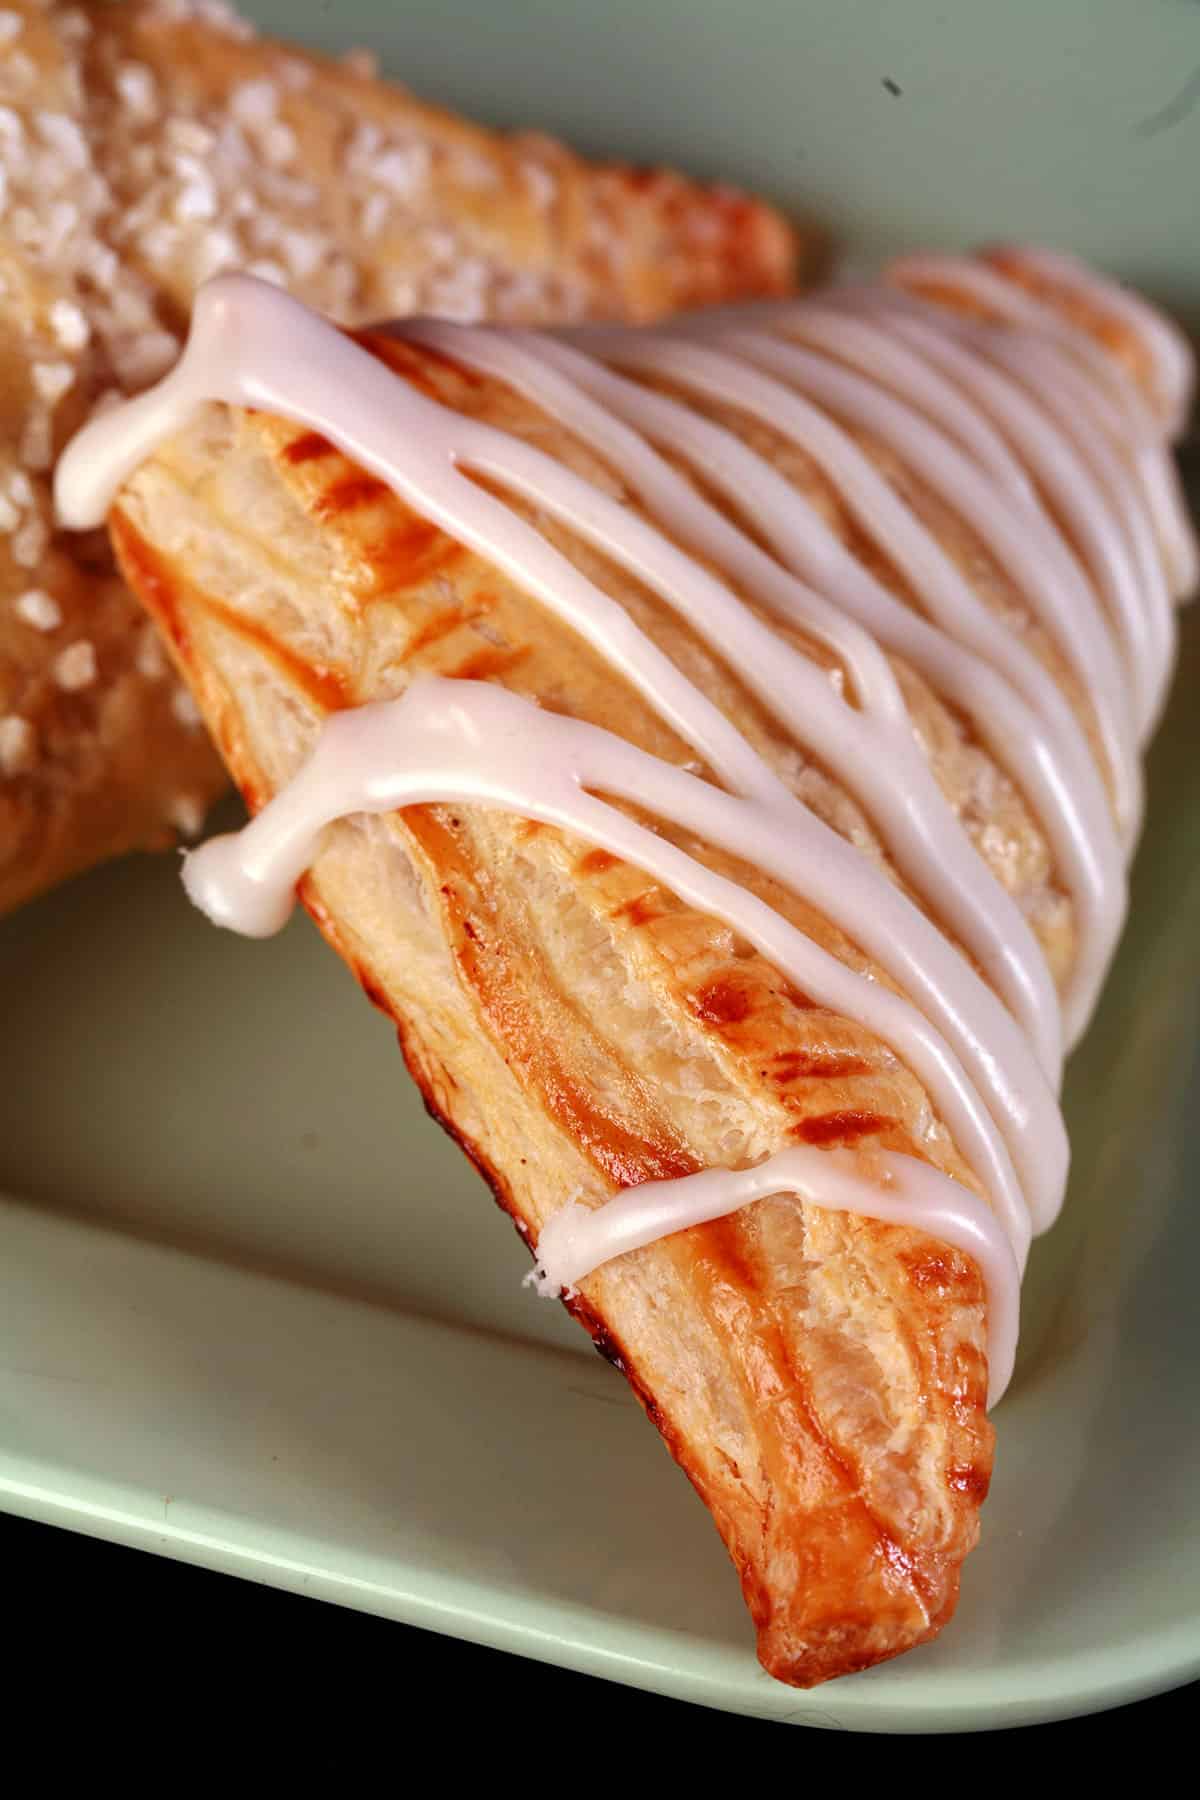 A close up view of a homemade apple turnover with a drizzled glaze.